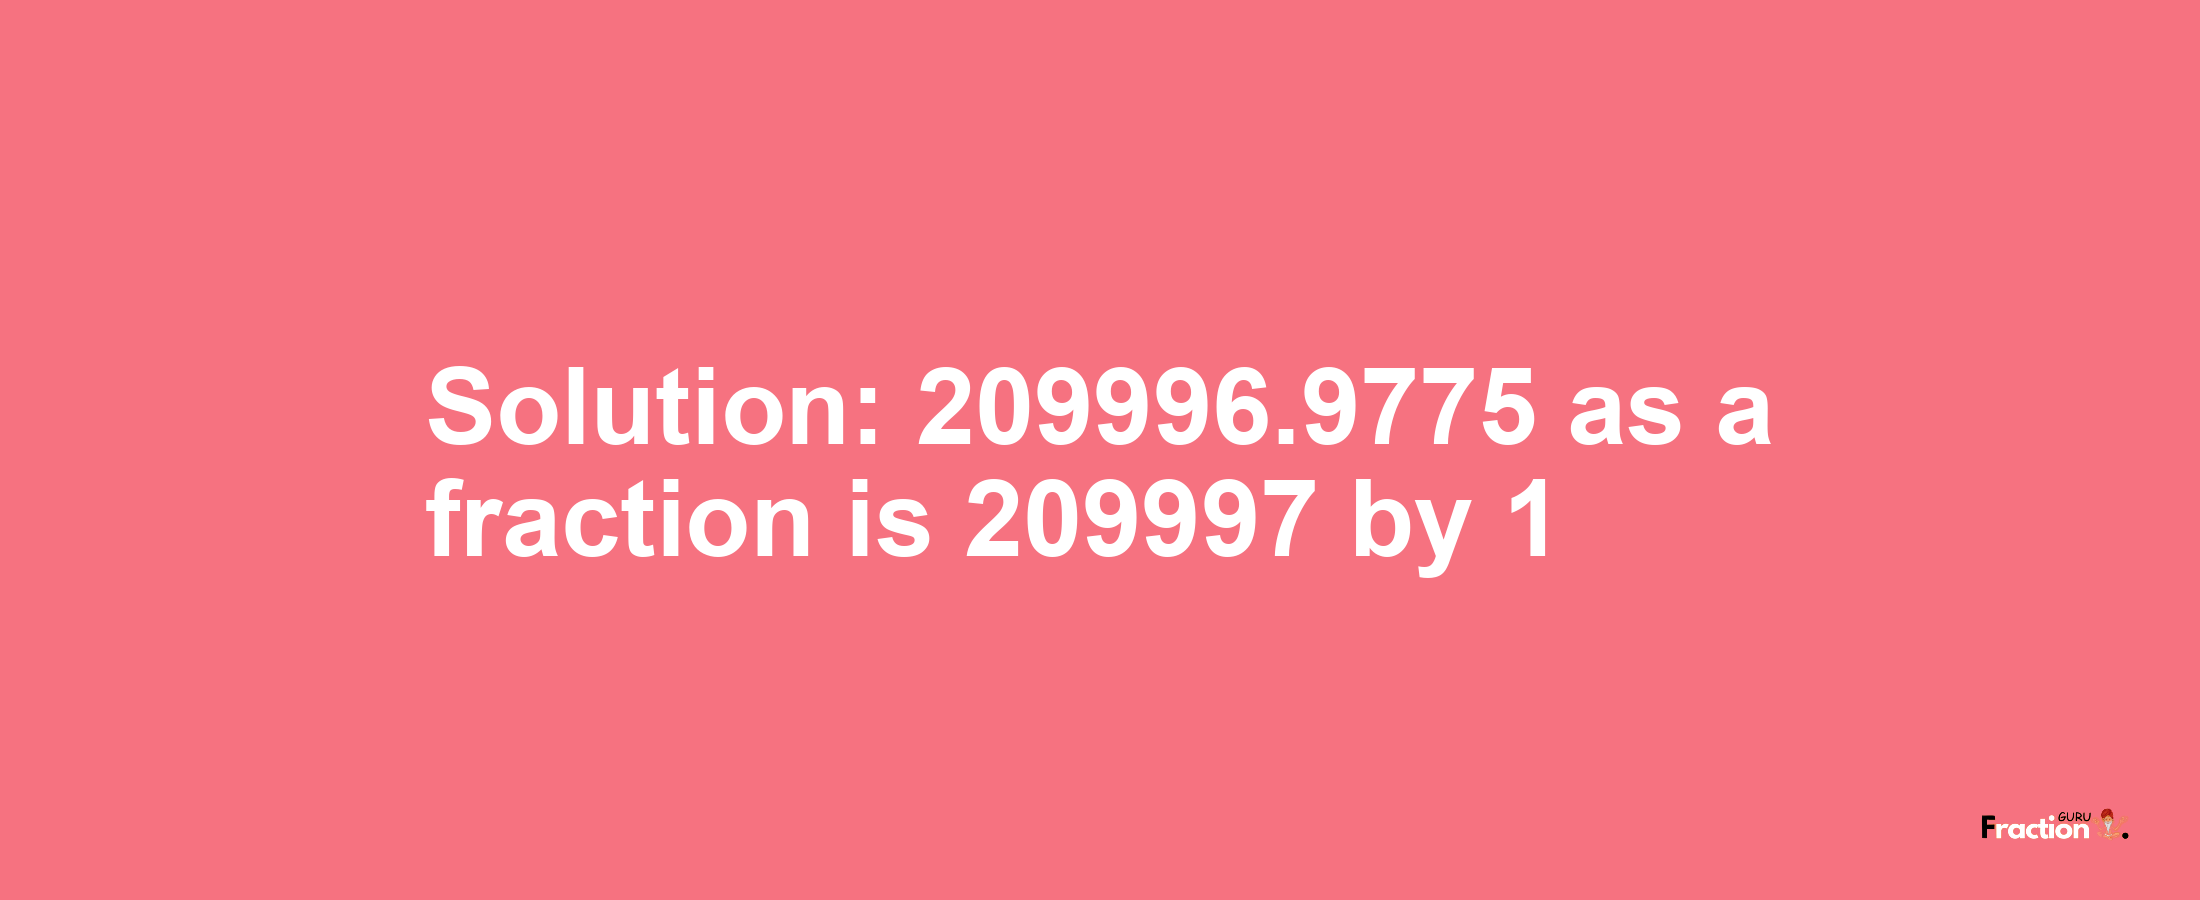 Solution:209996.9775 as a fraction is 209997/1